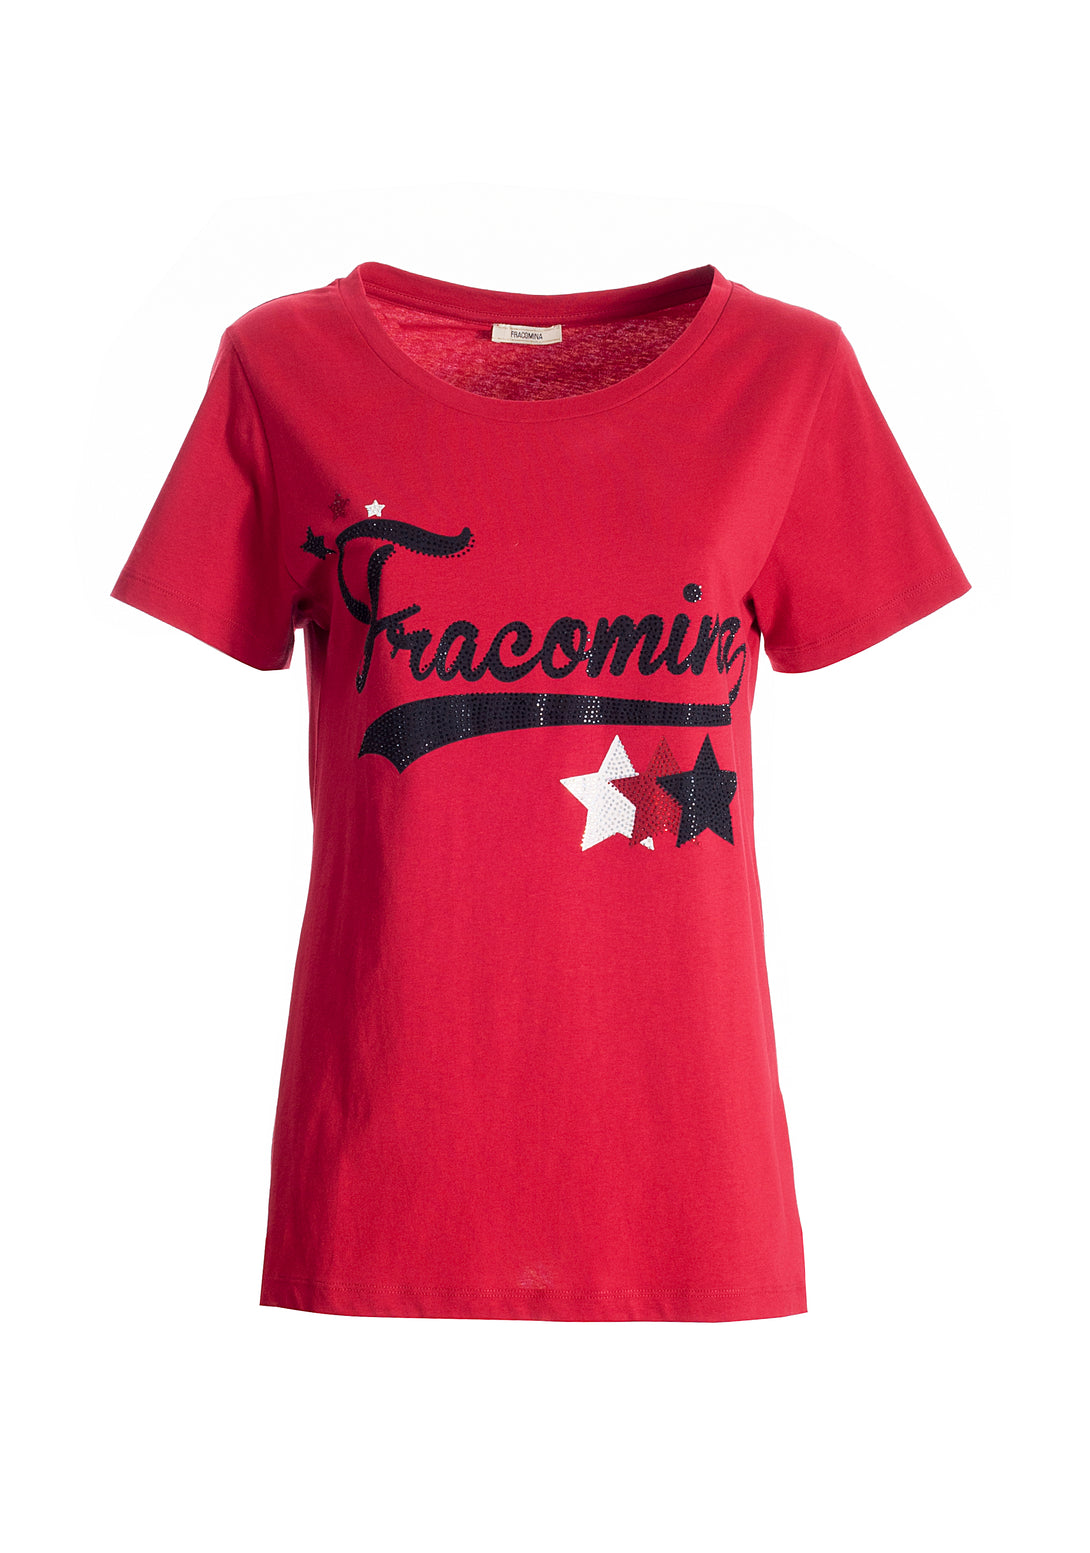 T-shirt regular fit made in cotton jersey with logo print and shiny strasses